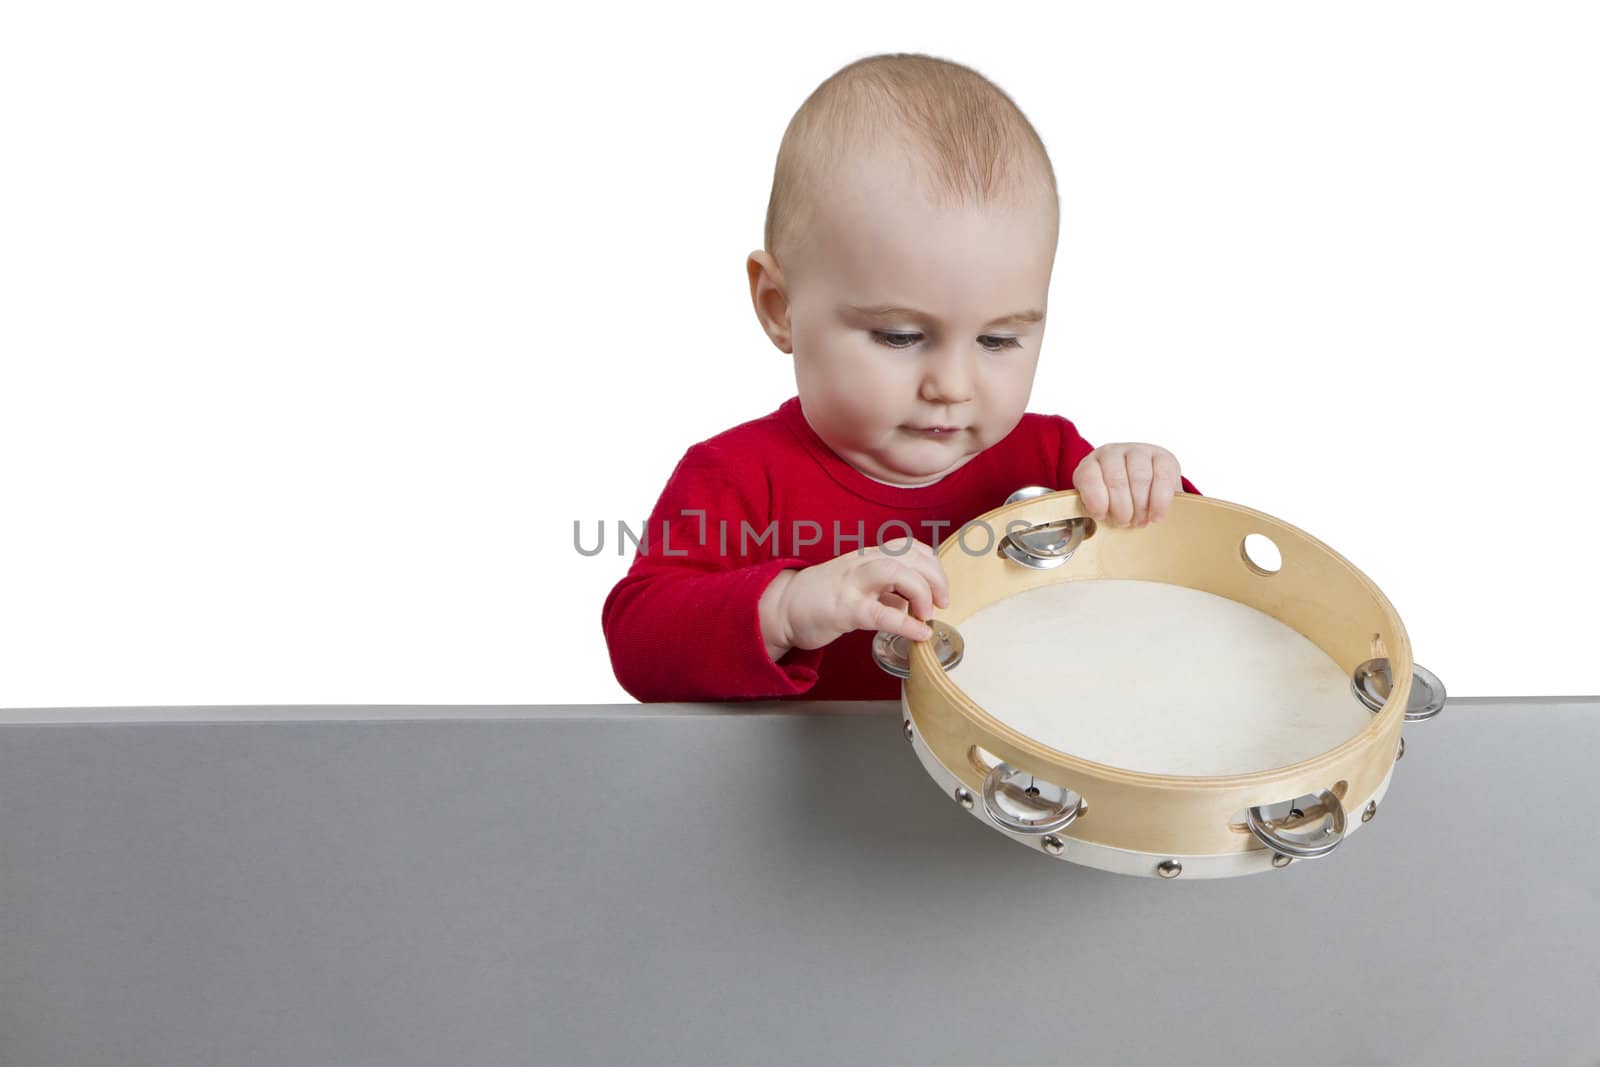 young child holding tambourine behind grey shield. isolate on white background